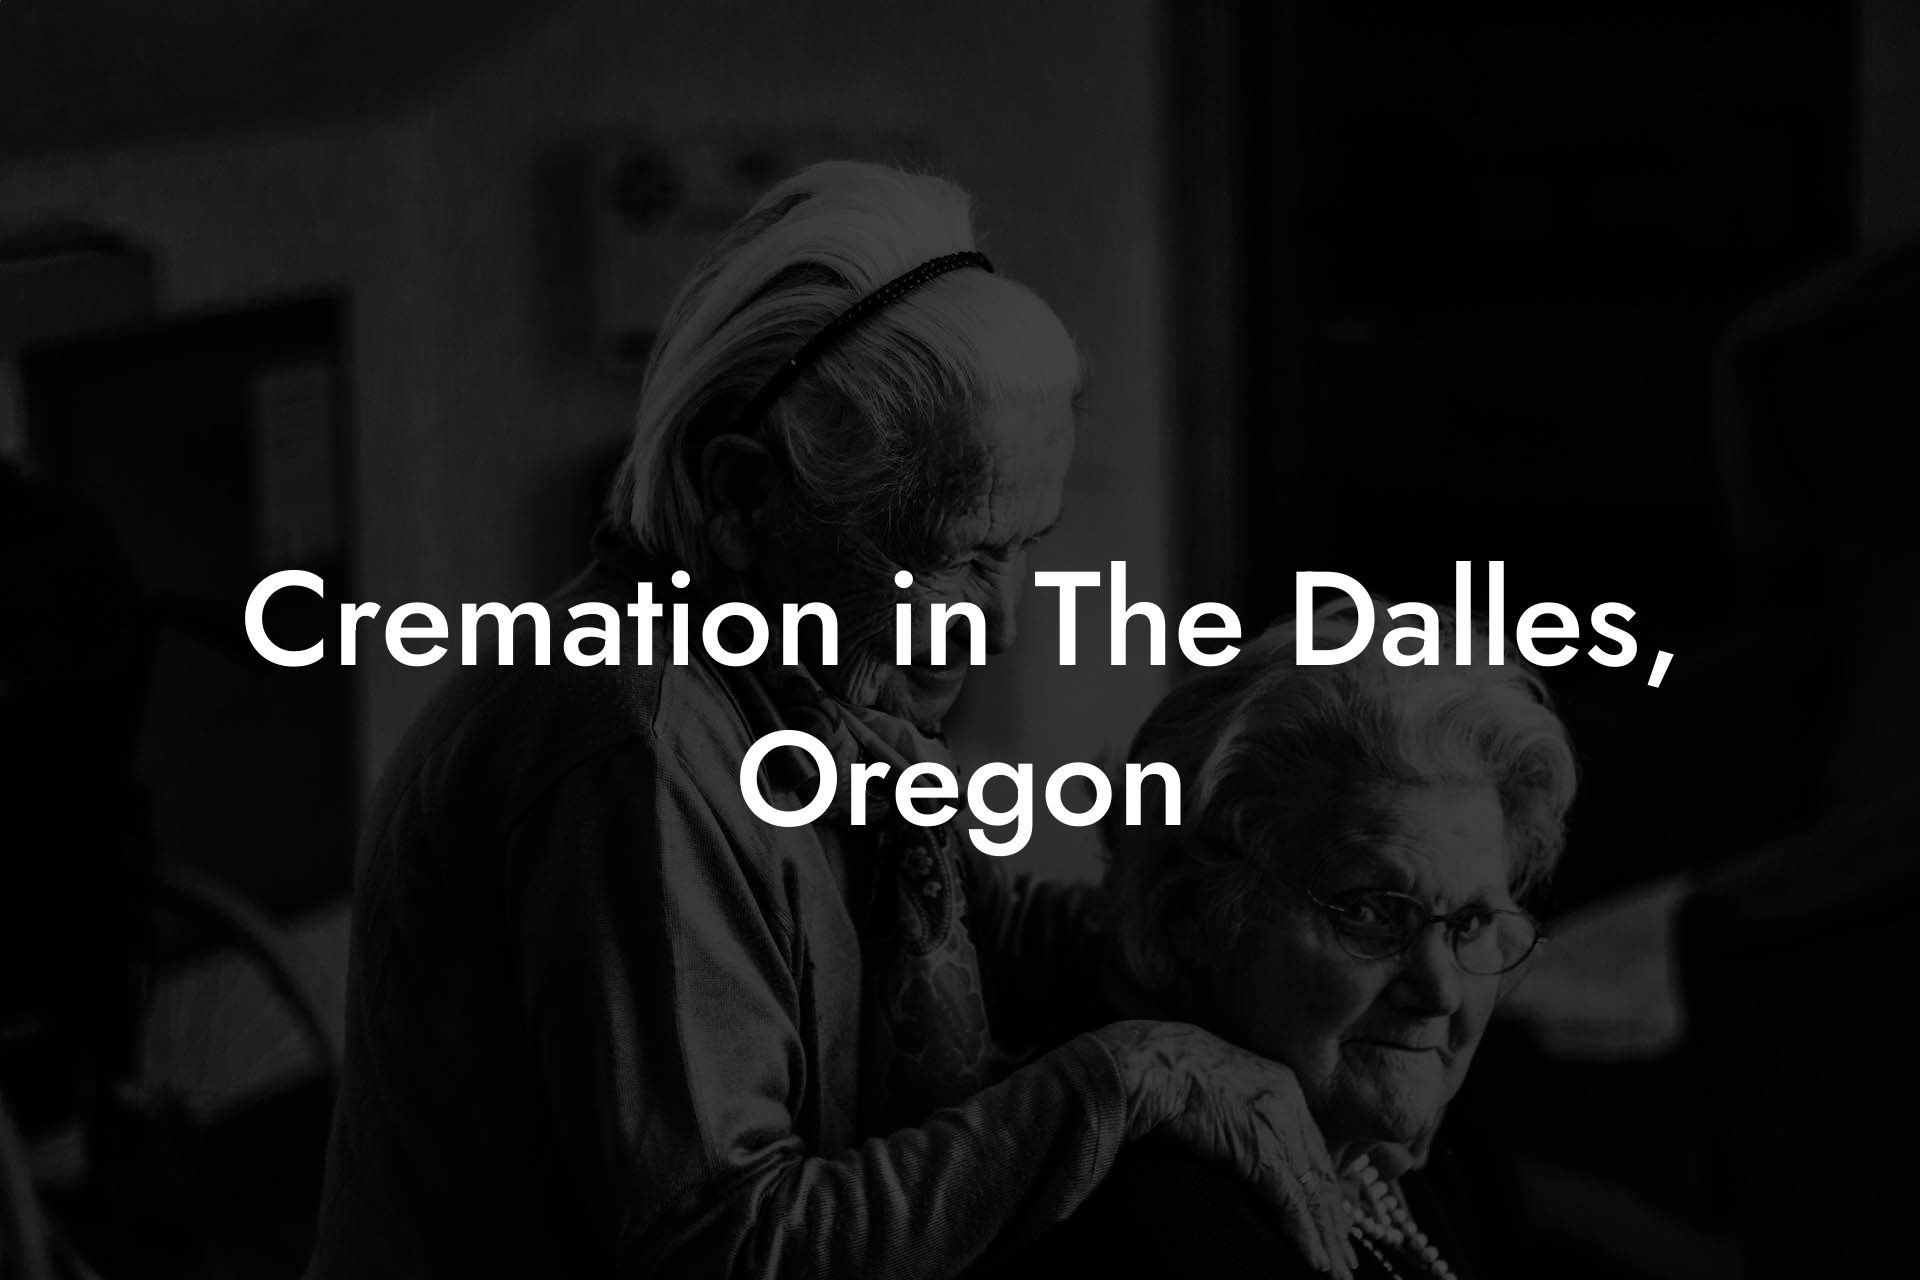 Cremation in The Dalles, Oregon